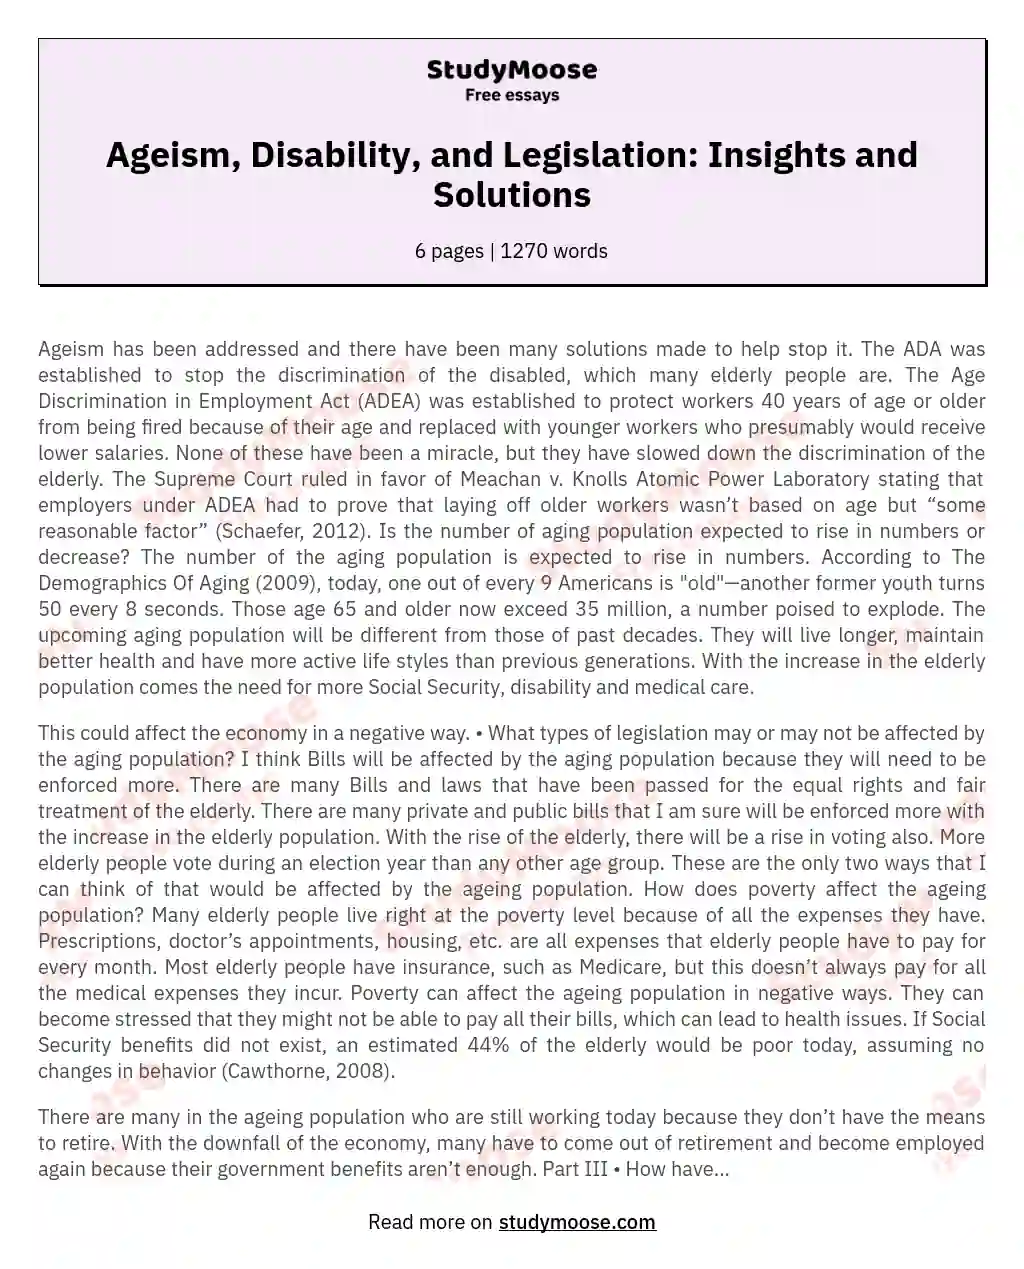 Ageism, Disability, and Legislation: Insights and Solutions essay